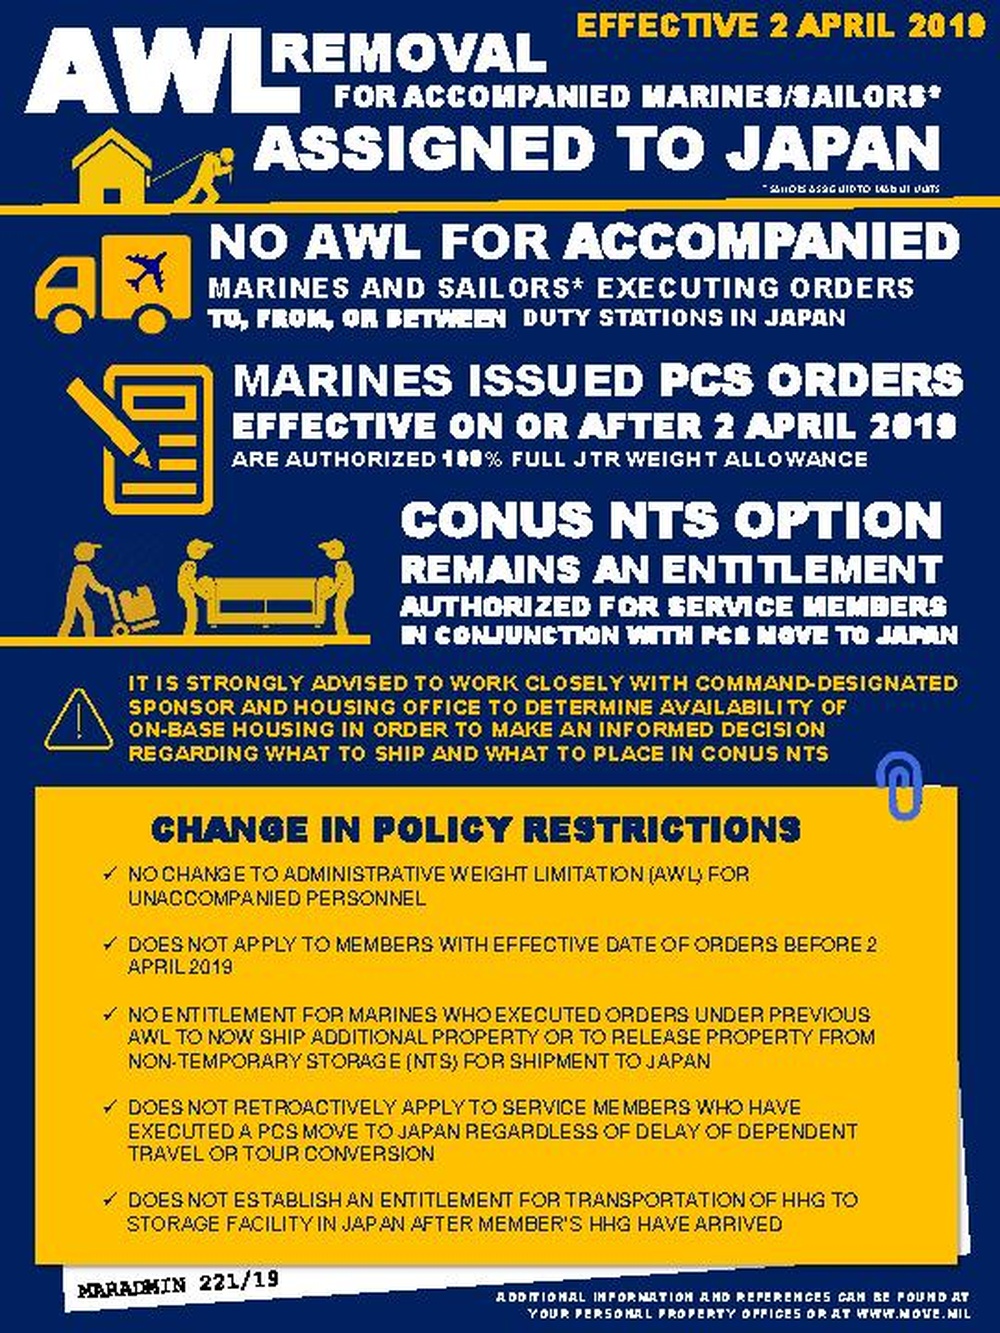 Infographic: Administrative Weight Limitation Removal for accompanied Marines and Sailors assigned to Japan